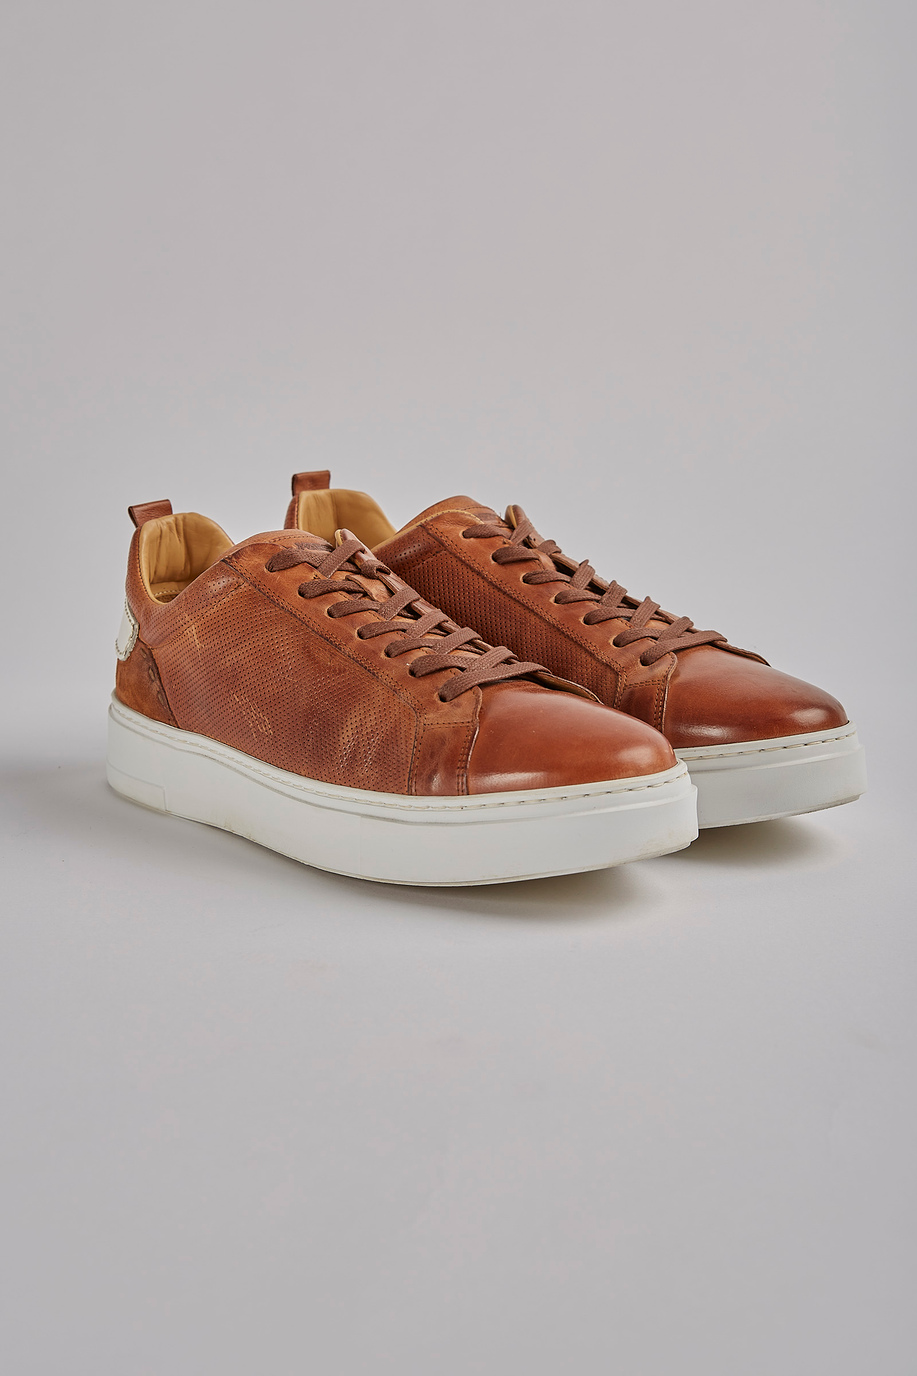 Vegetable eco-leather sneaker